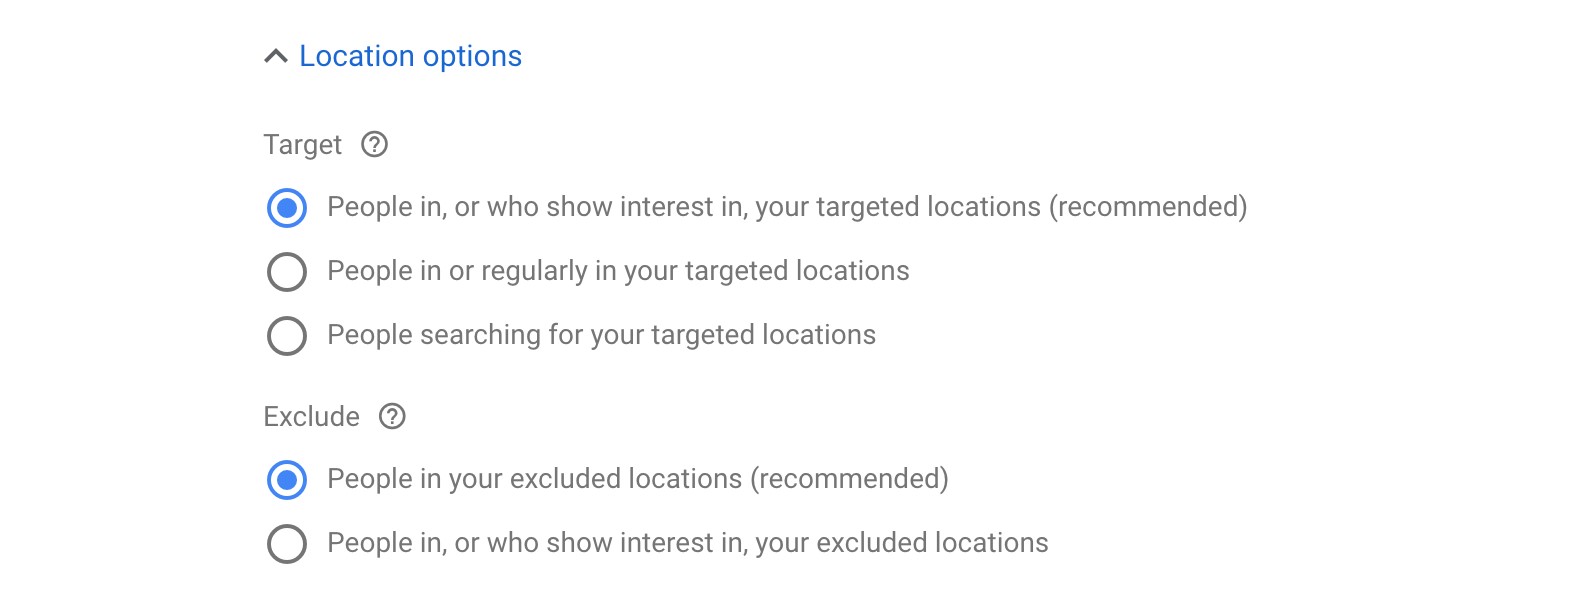 Location options in Google Ads